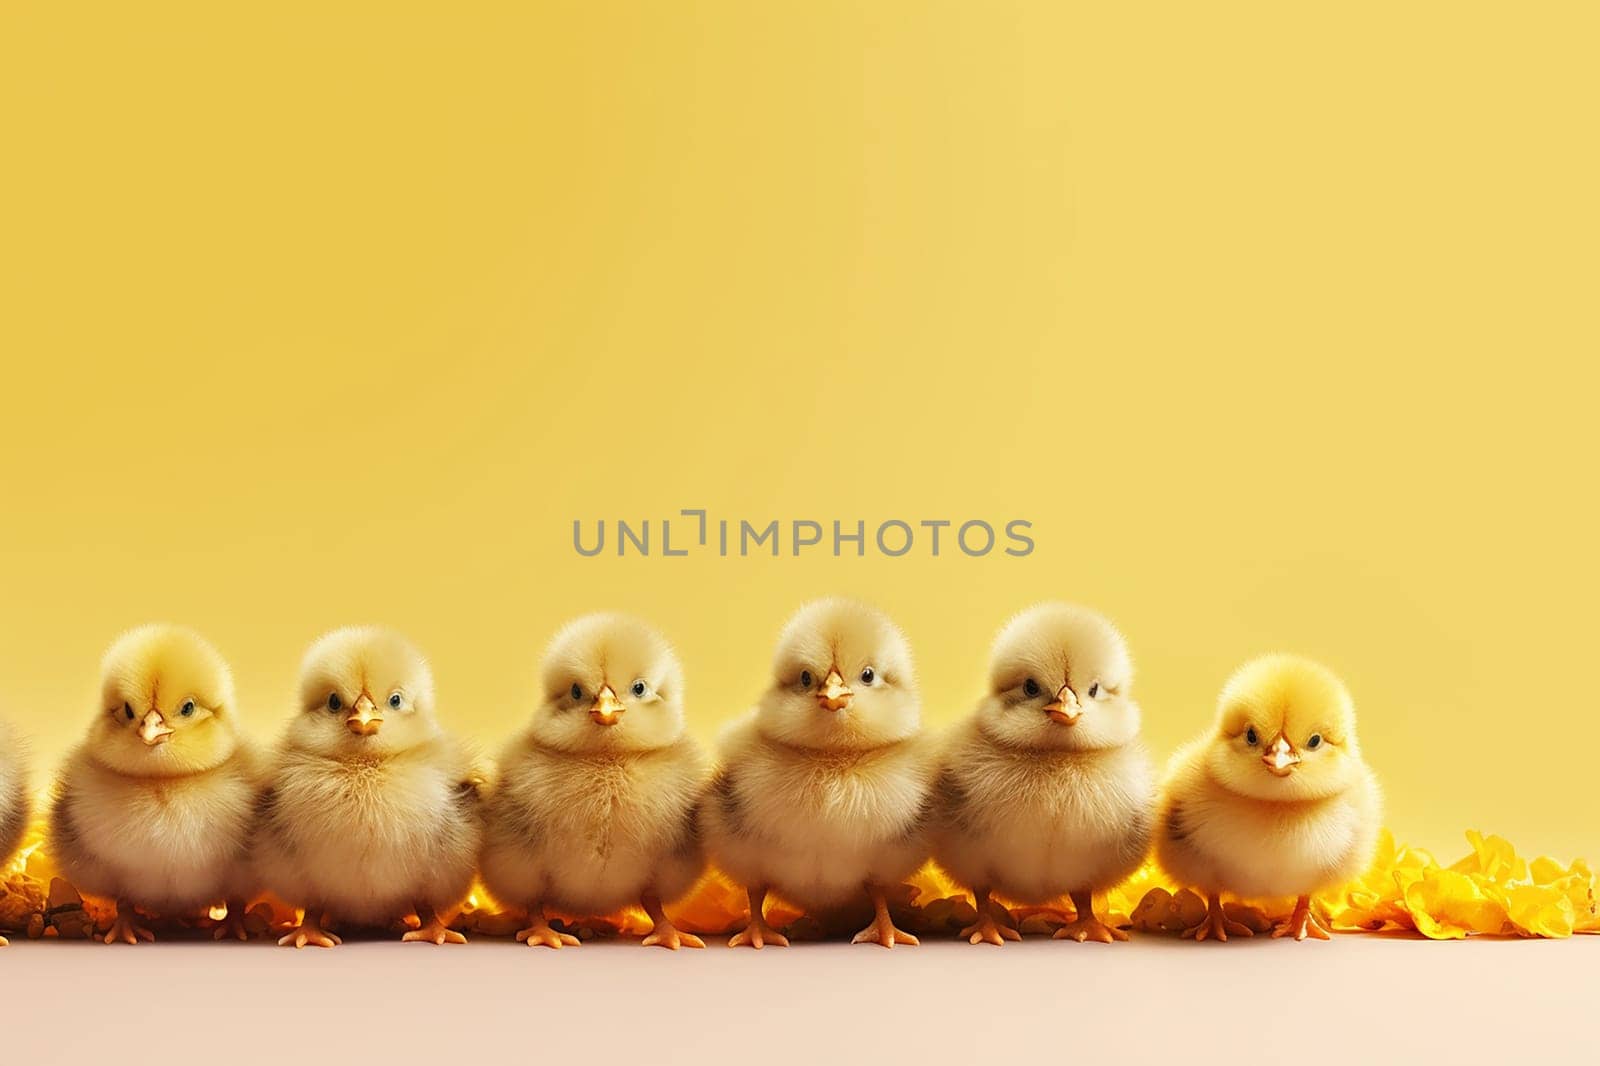 Row of cute fluffy chicks on a yellow background with copy space.